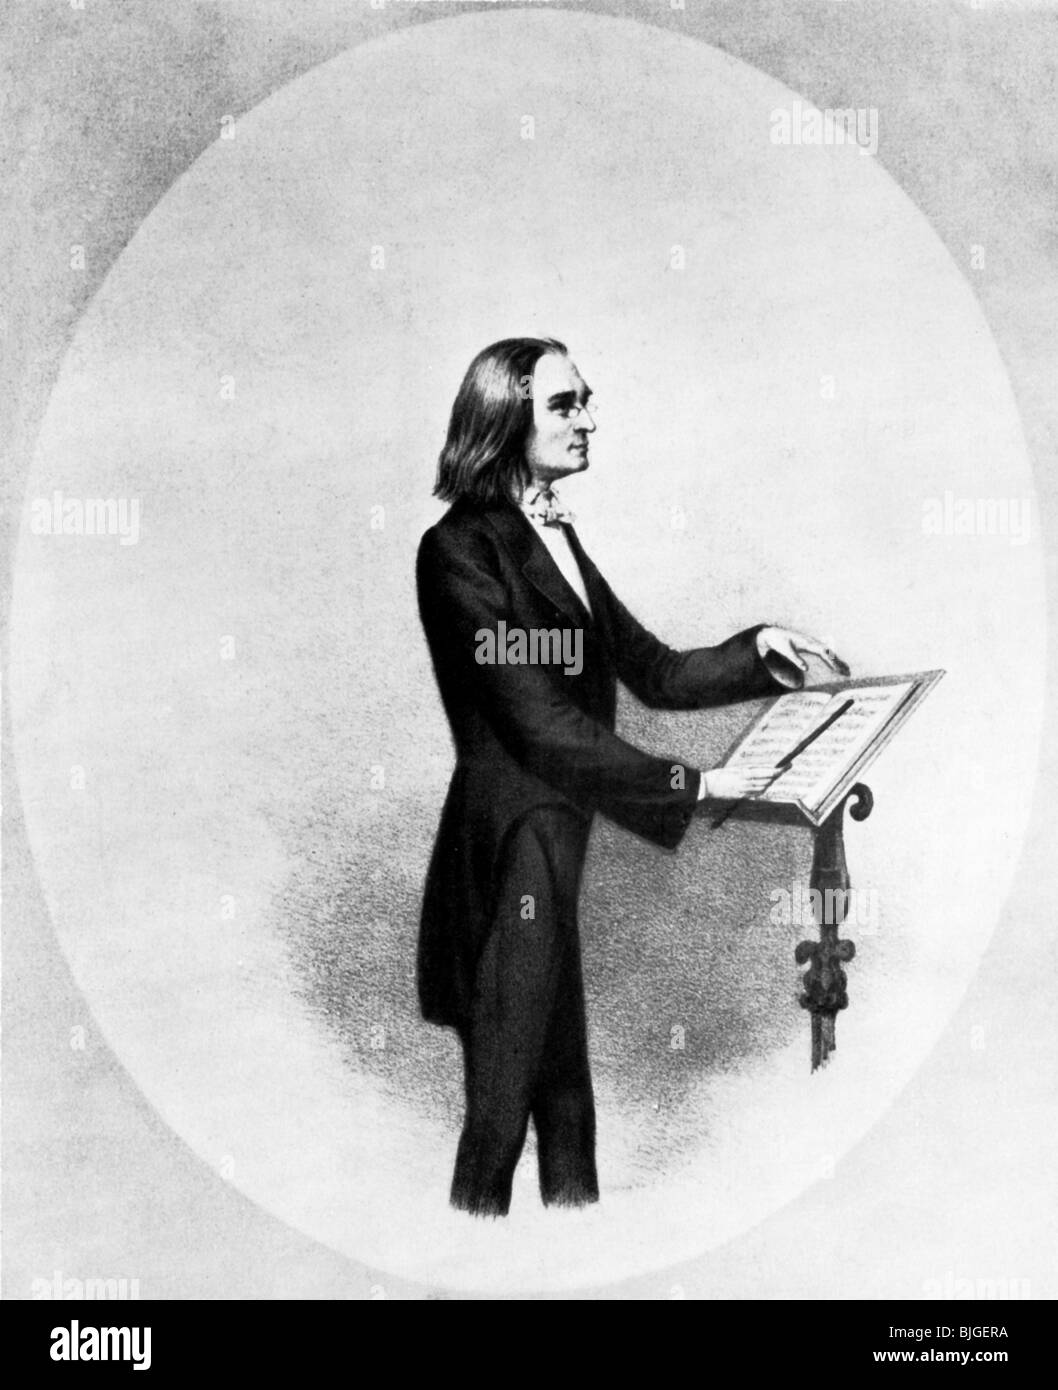 Liszt, Franz, 22.10.1811 - 31.7.1886, Hungarian composer and pianist, as conductor, lithograph after C. F. Hoffmann, um 1853, , Stock Photo